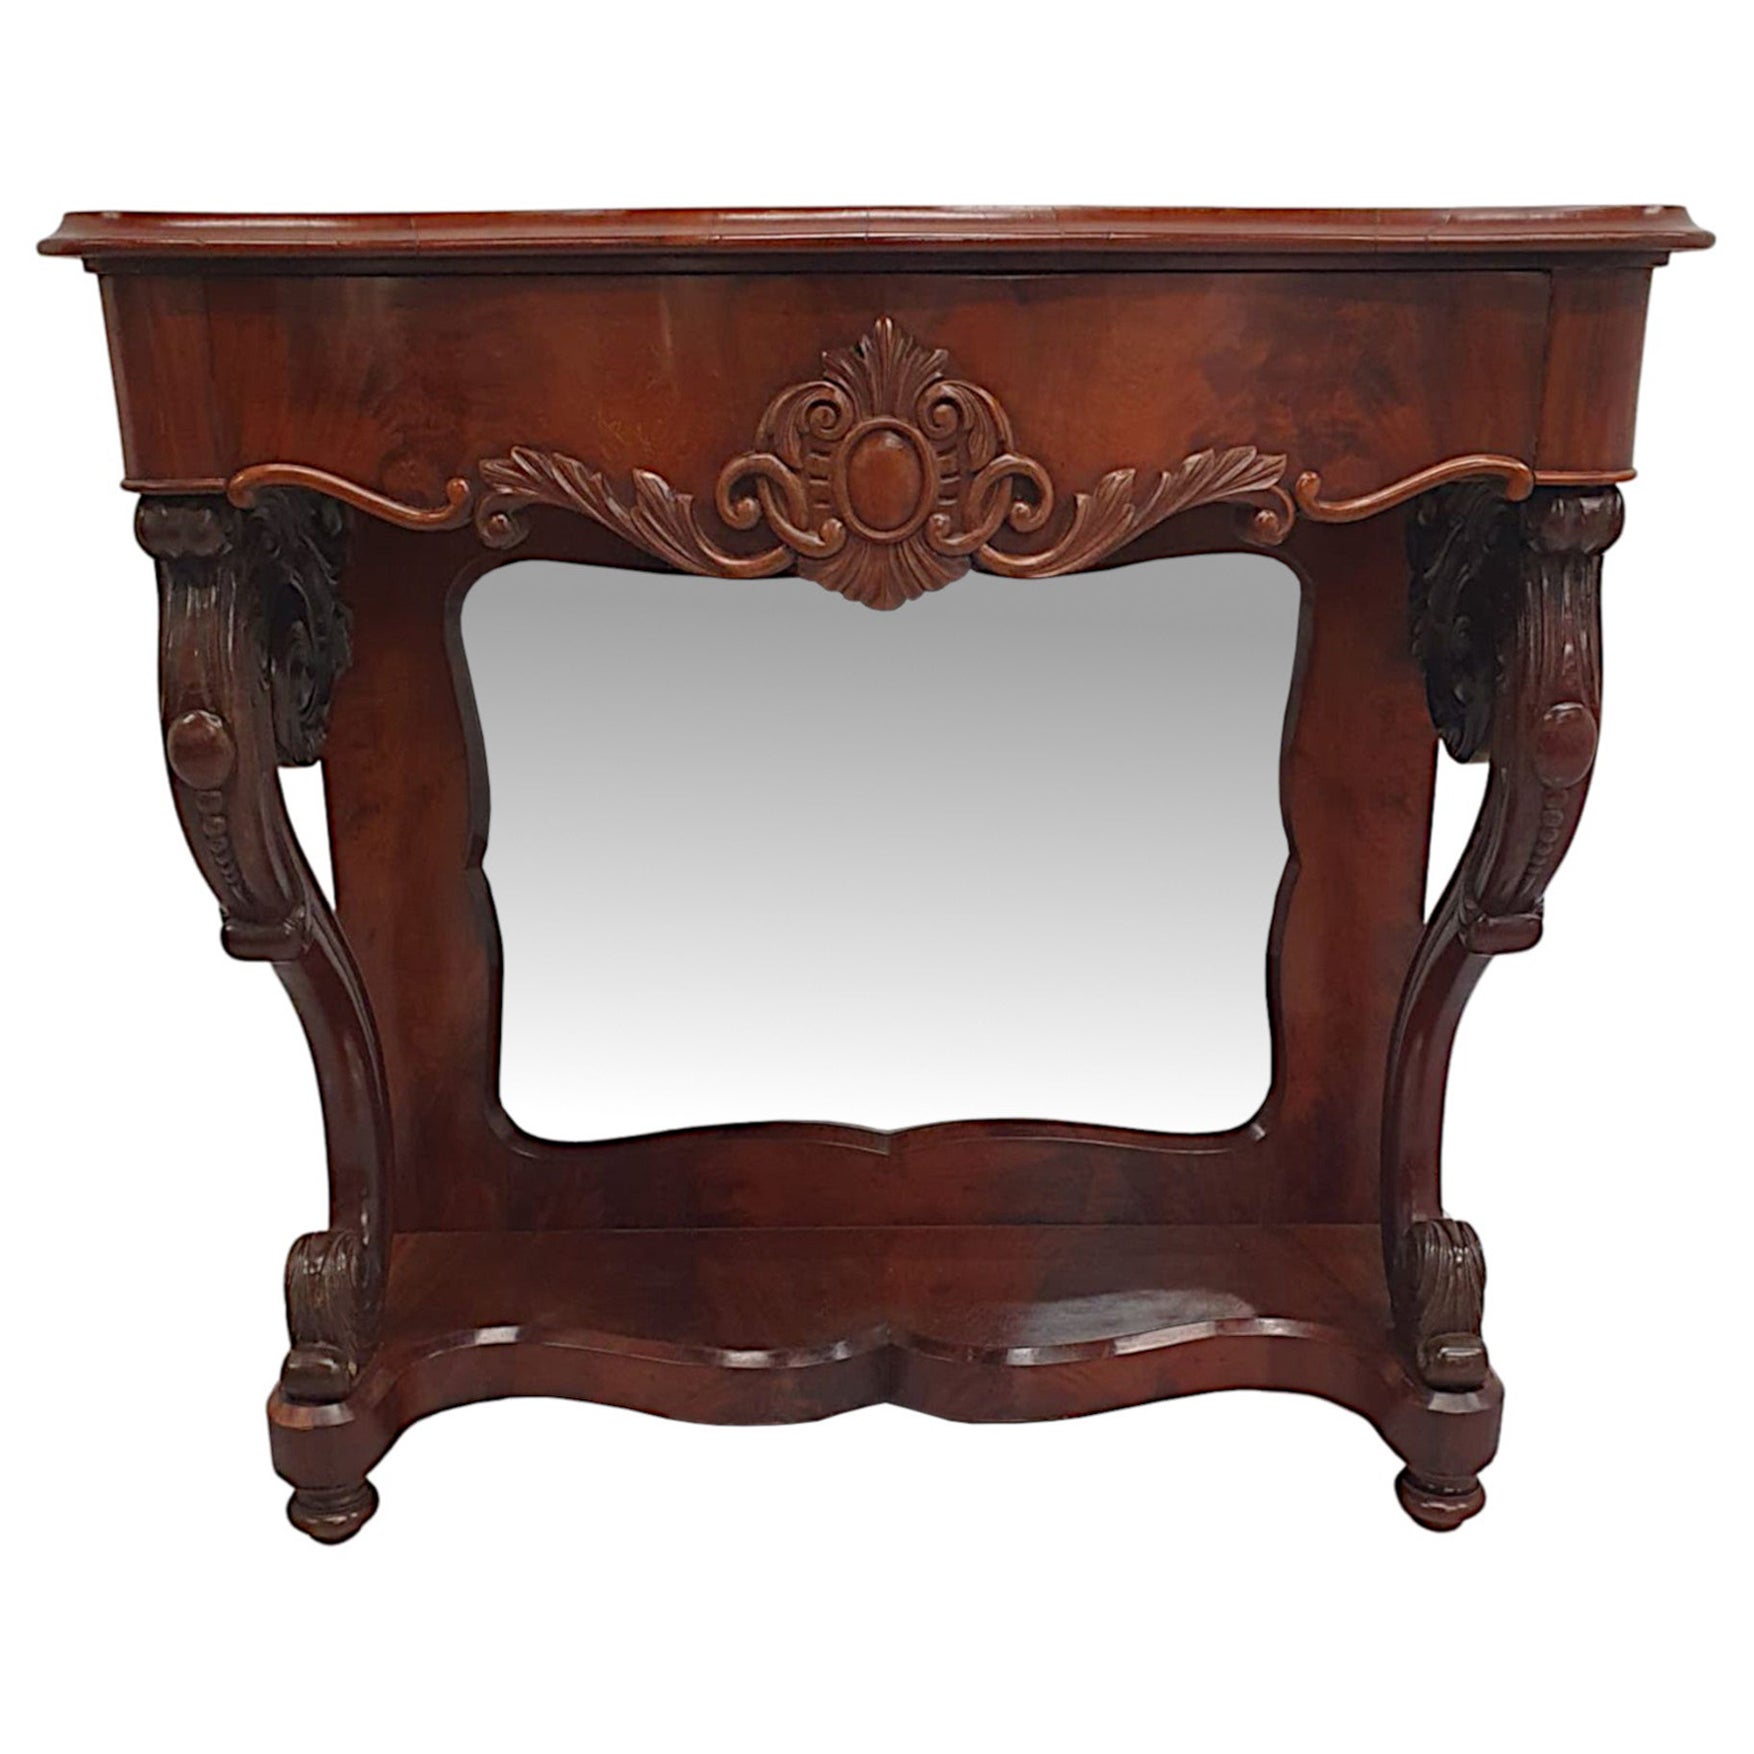  A Very Fine 19th Century Flame Mahogany Mirror Back Console Table  For Sale